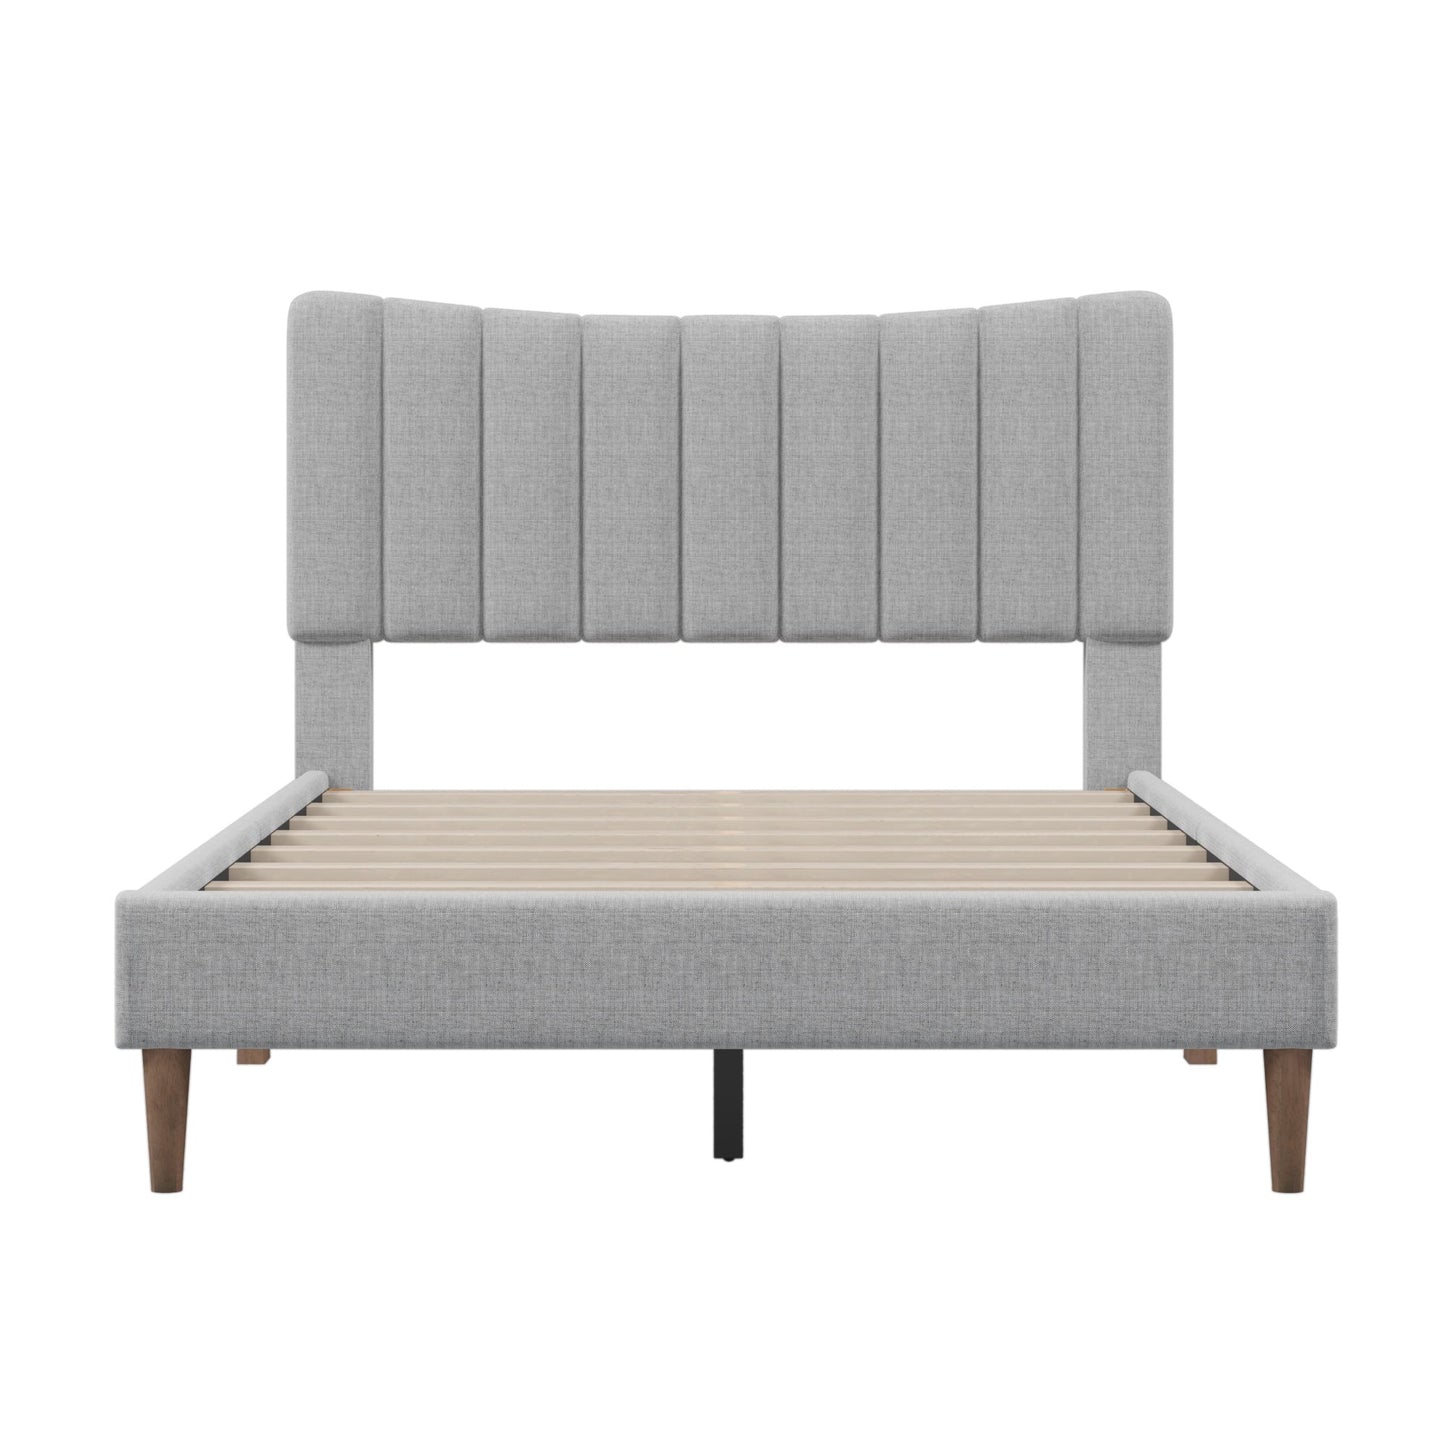 Gewnee Upholstered Full Platform Bed Frame with Tufted Headboard and Solid Wood Legs,Gray